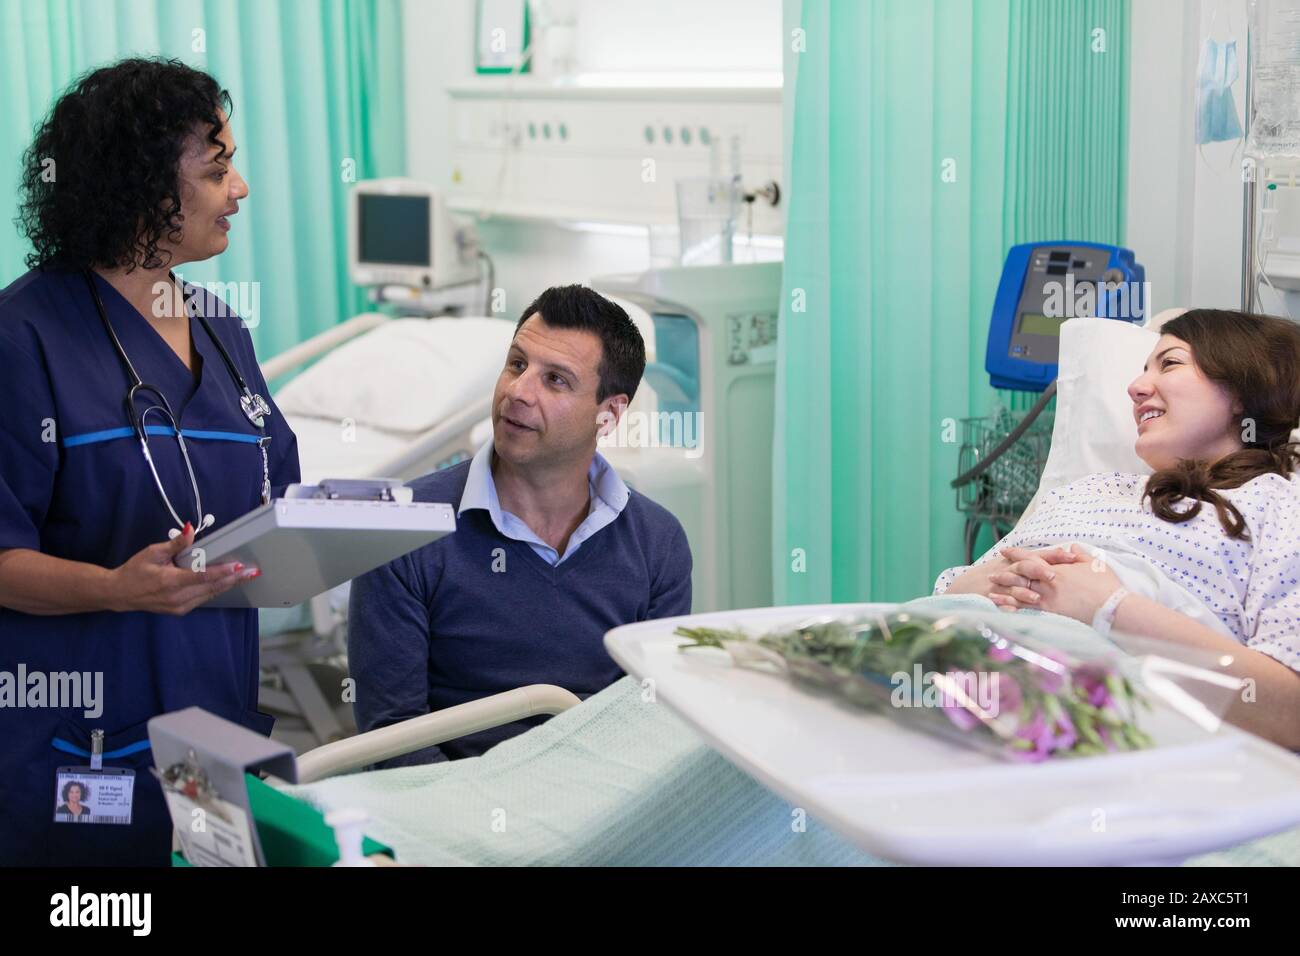 Doctor with medical chart making rounds, talking with couple in hospital room Stock Photo